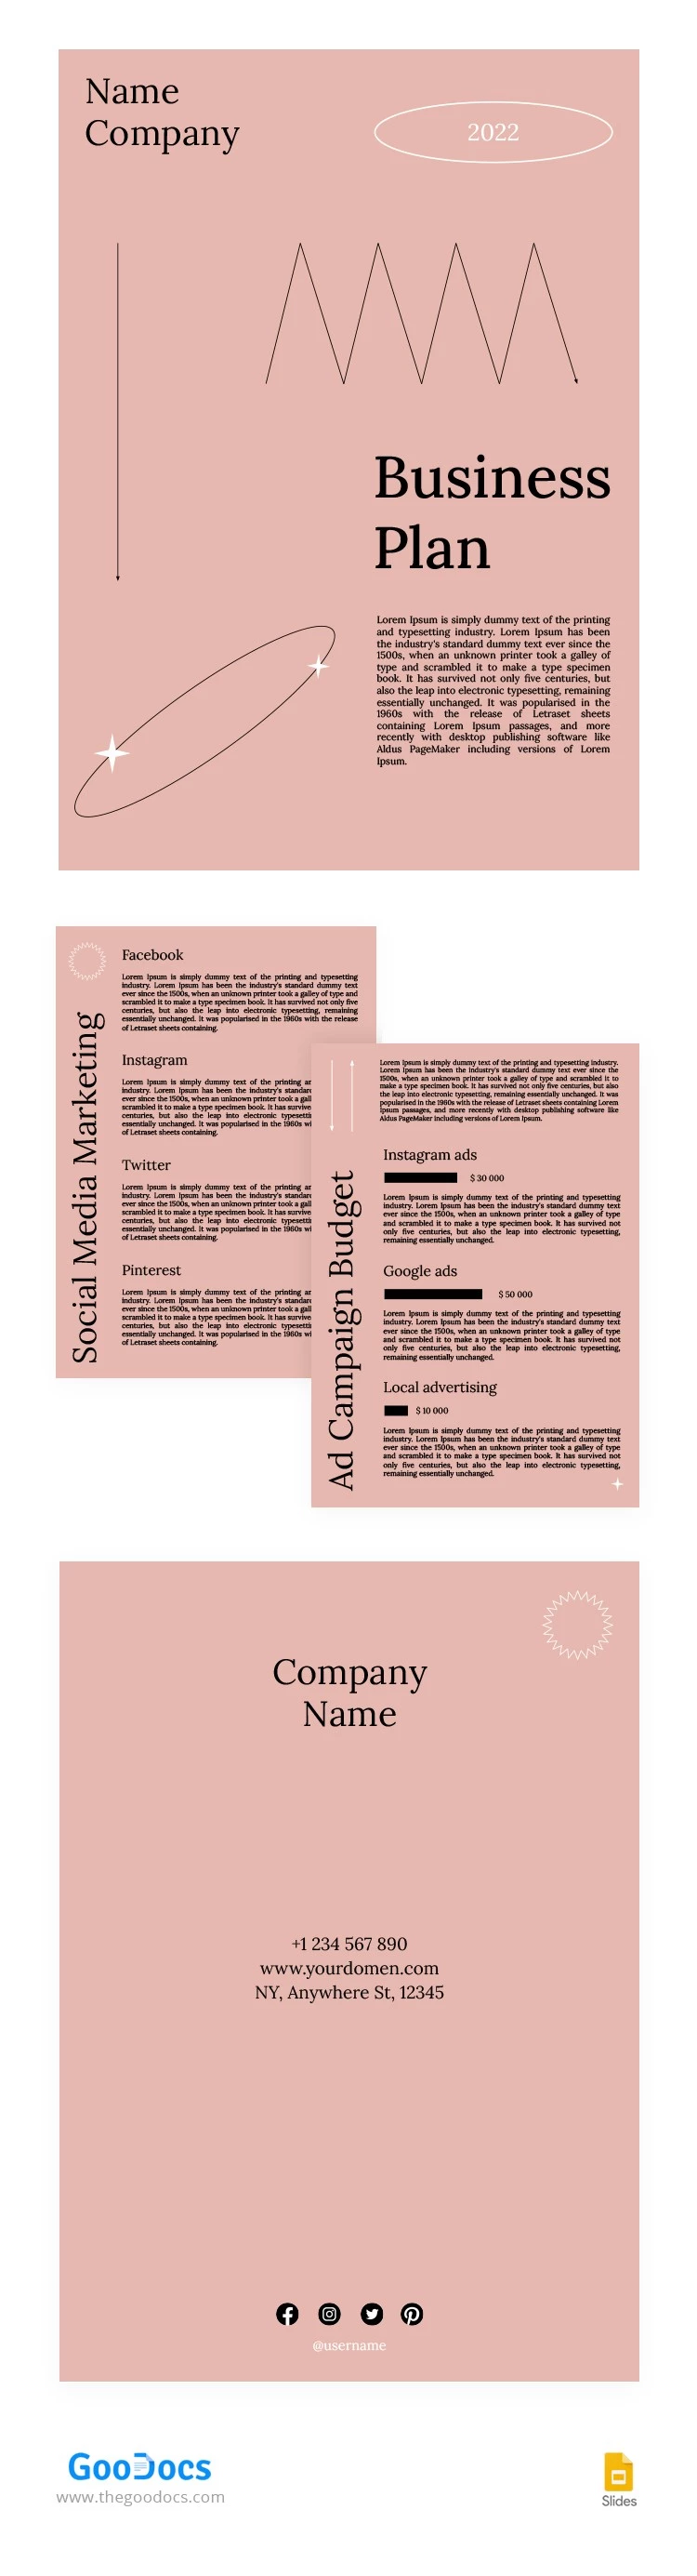 Piano aziendale Pink - free Google Docs Template - 10062693